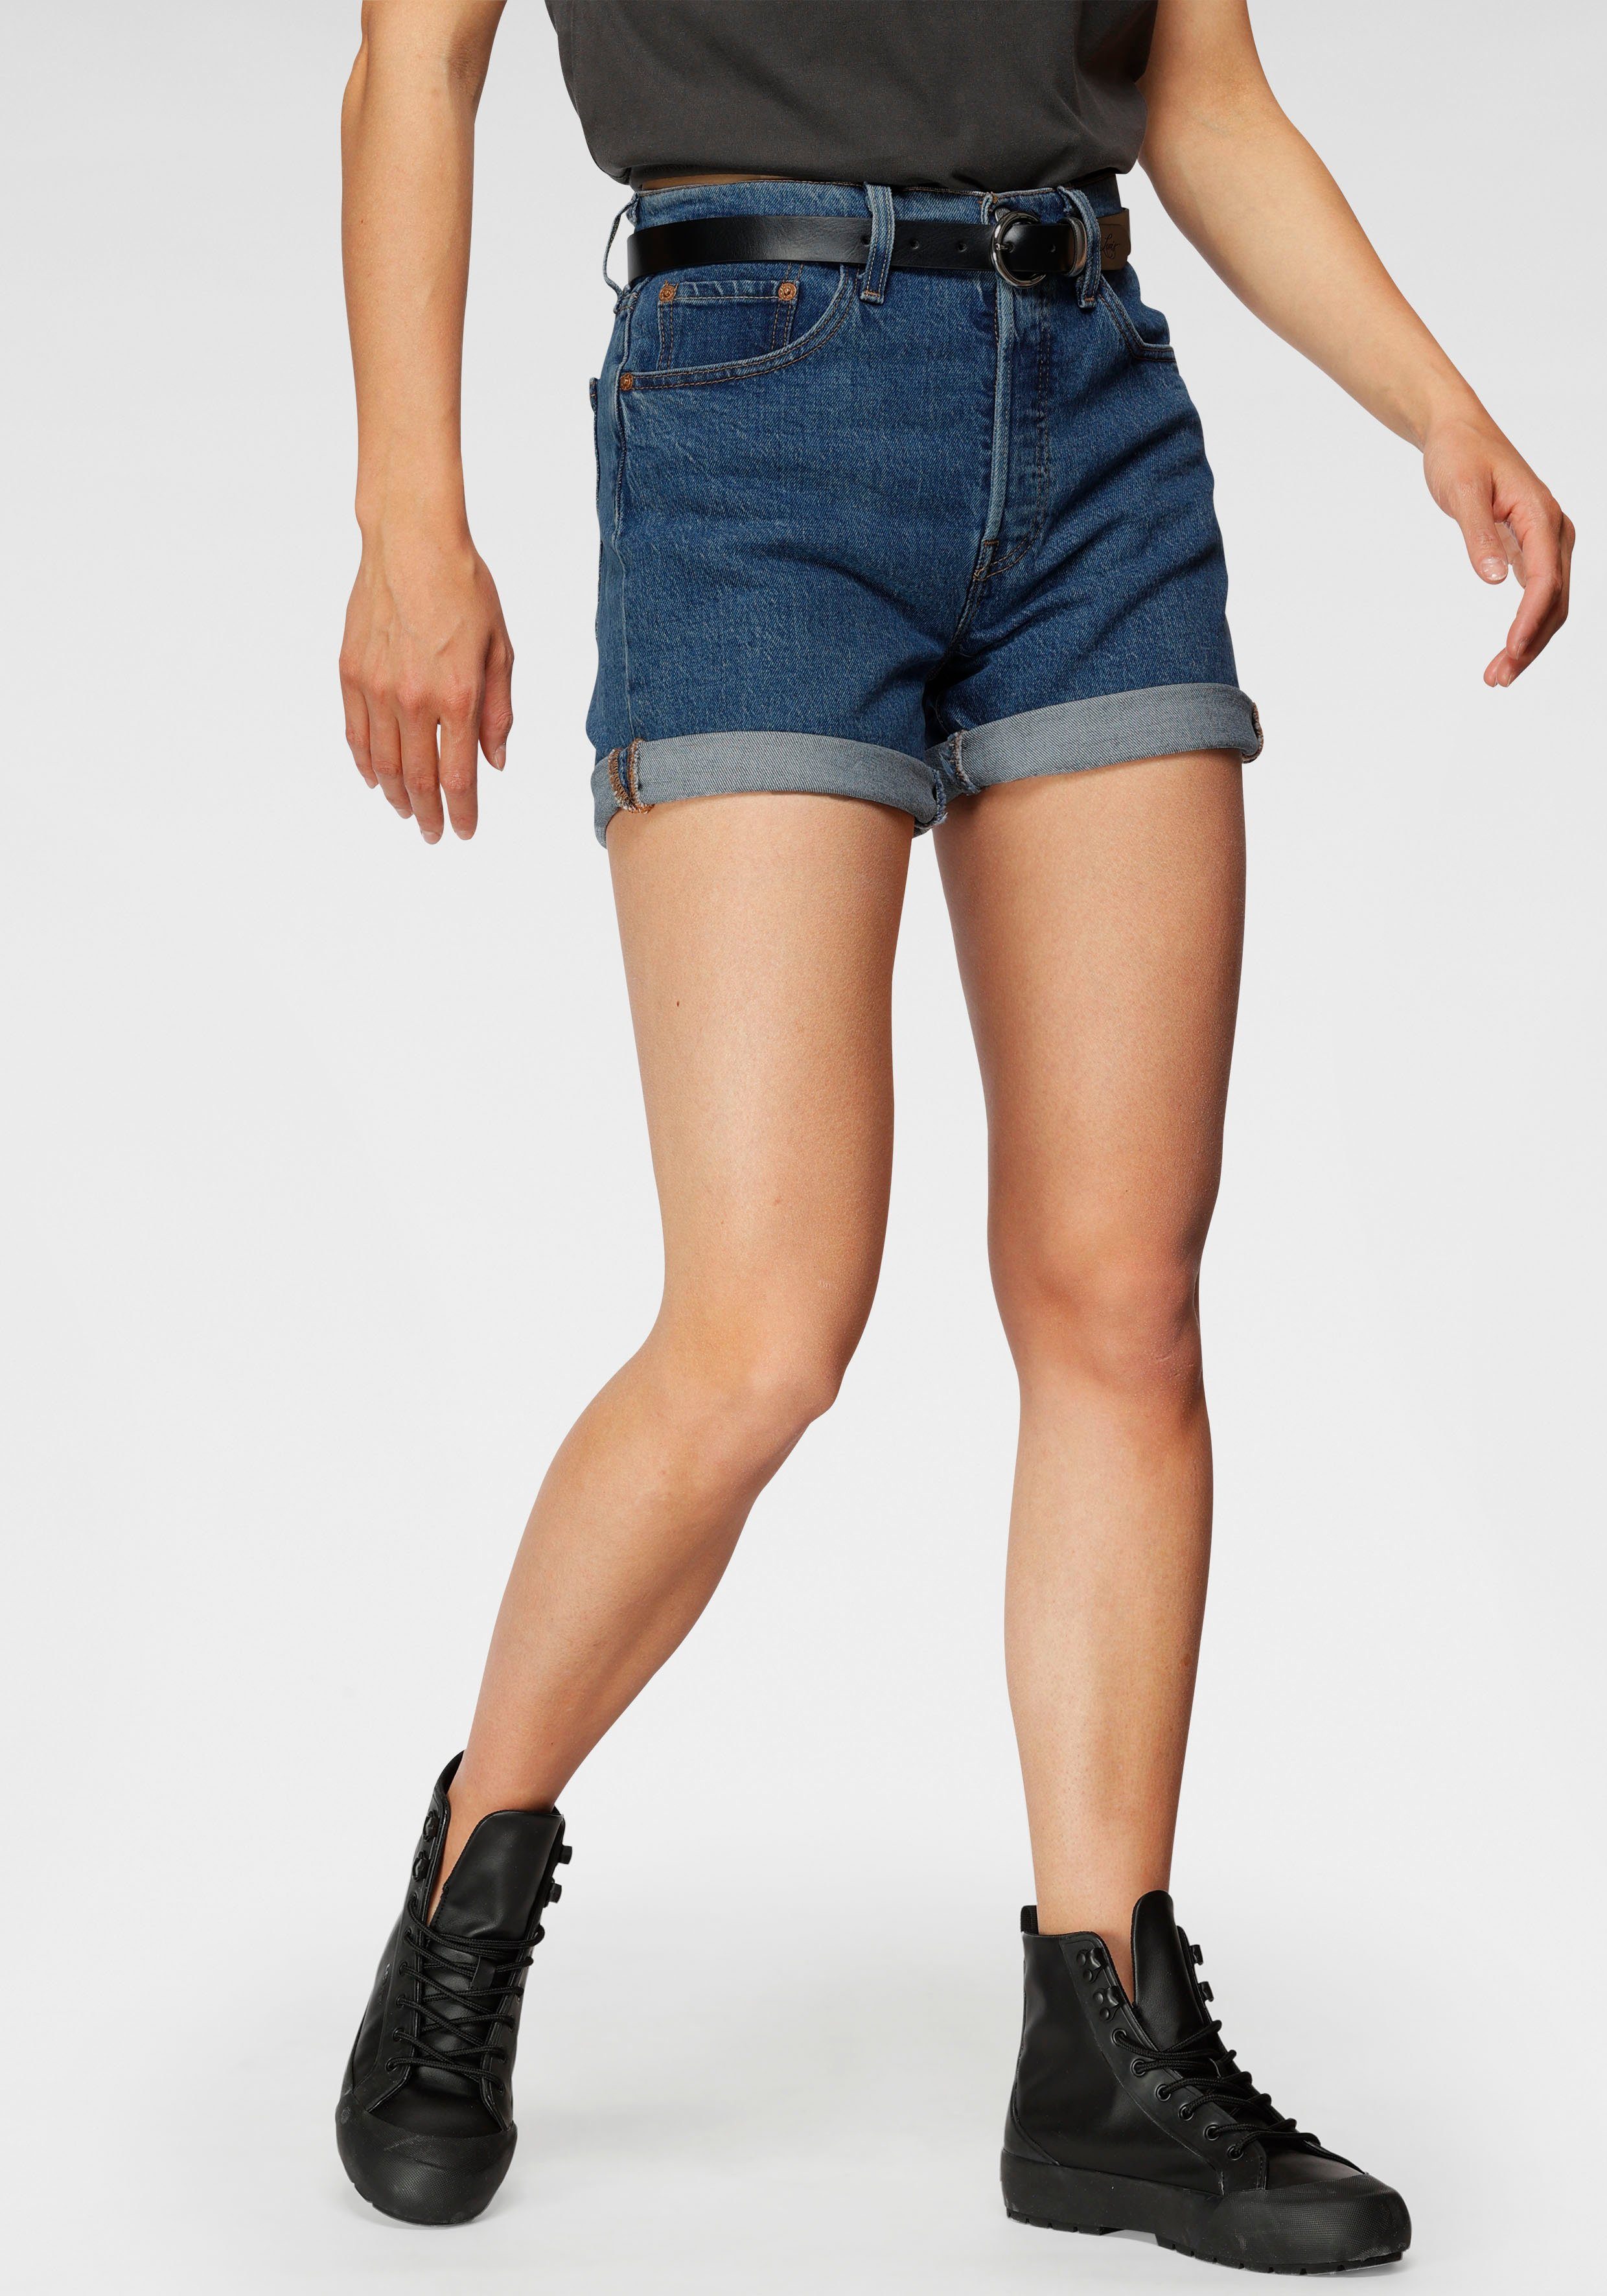 Levi's® Shorts 501 Mid Collection Short 501 Thigh